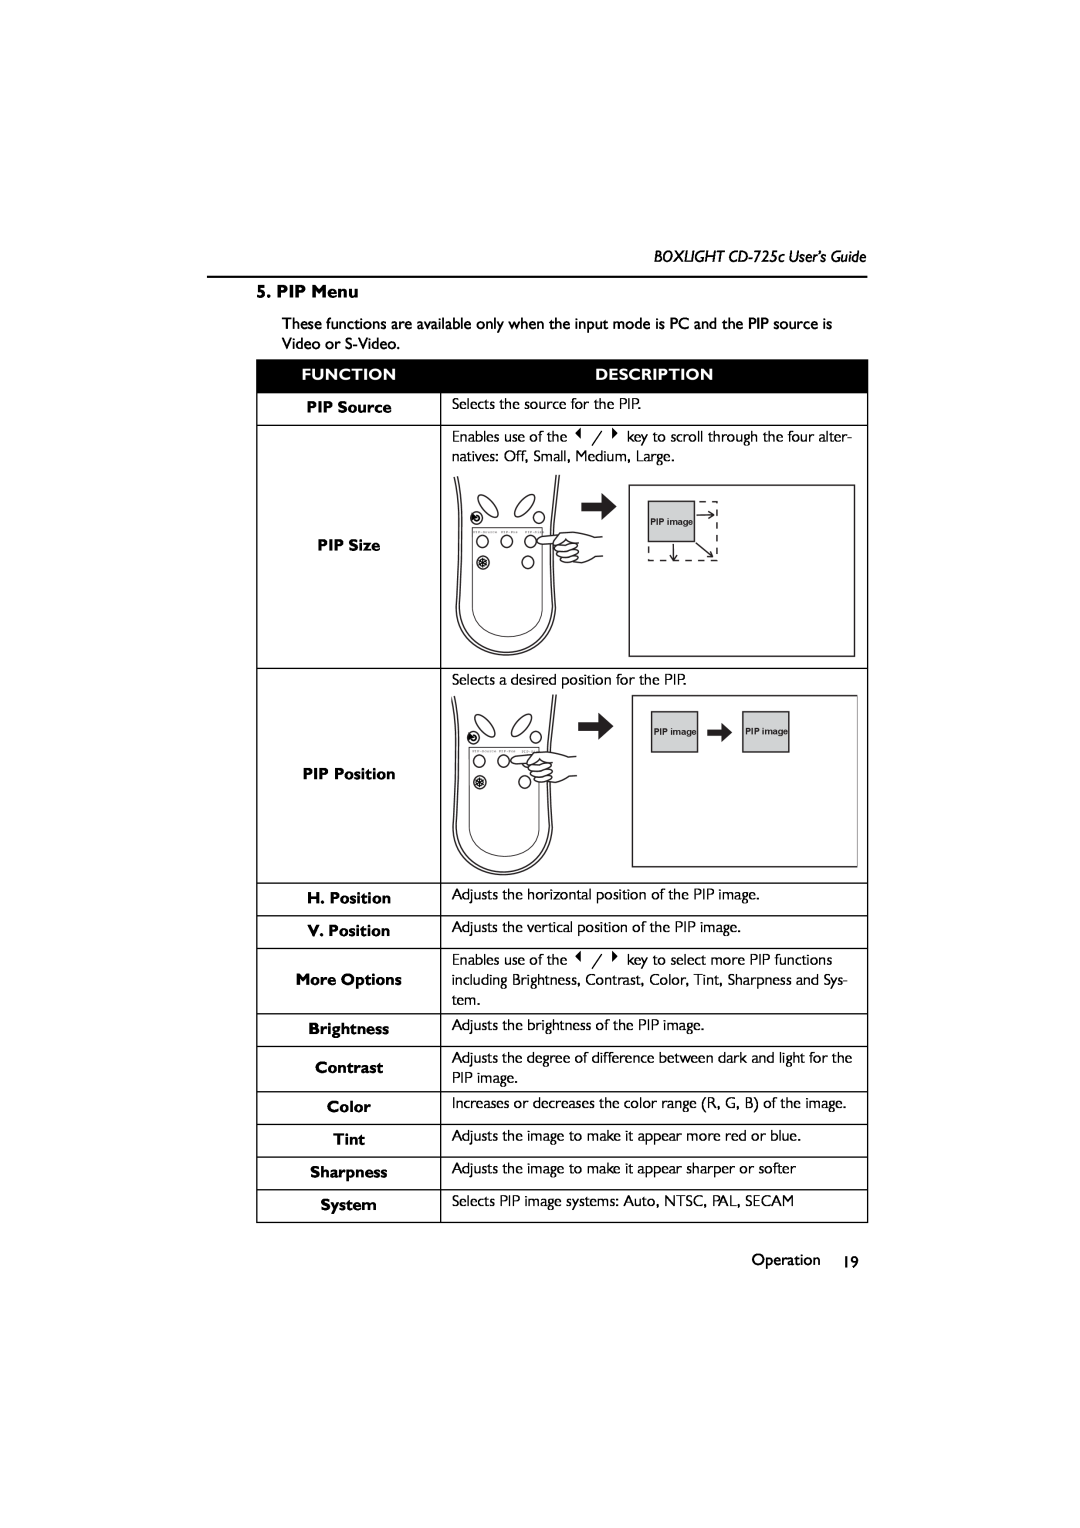 BOXLIGHT manual PIP Menu, BOXLIGHT CD-725c User’s Guide, Function, Description, Selects the source for the PIP, PIP Size 